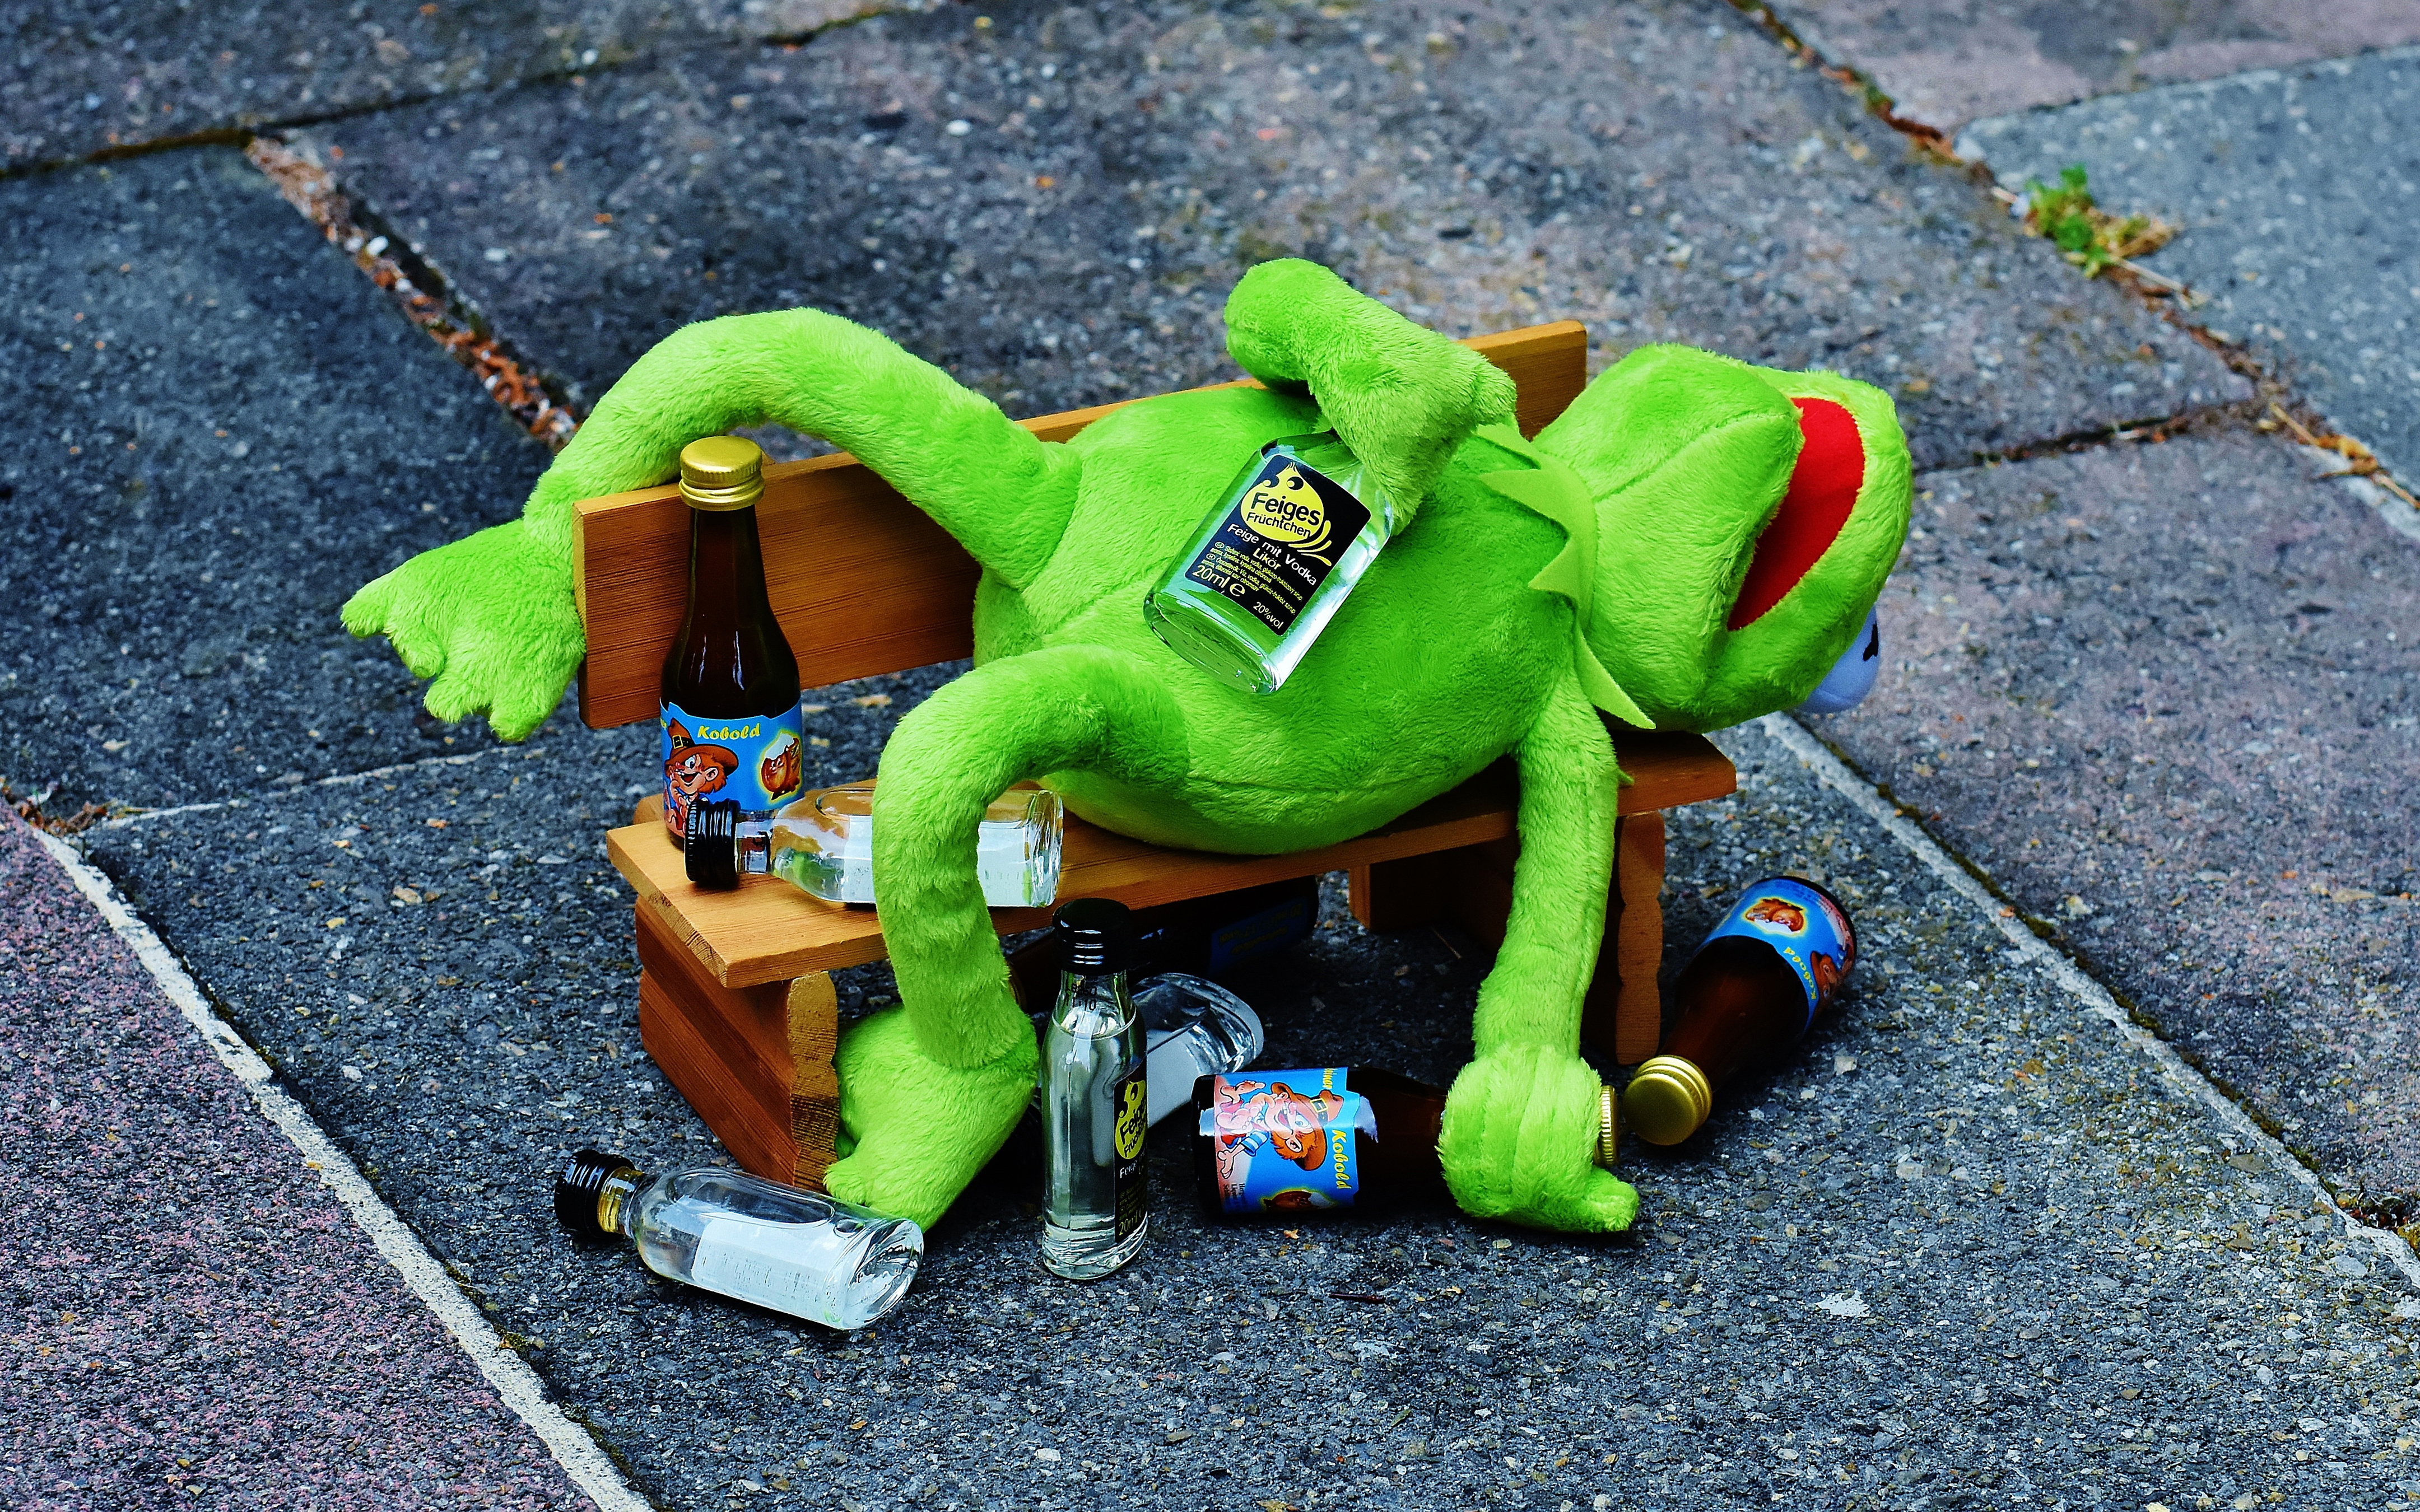 General 4320x2700 Kermit the Frog The Muppets drunk vodka humor drinking problems closeup